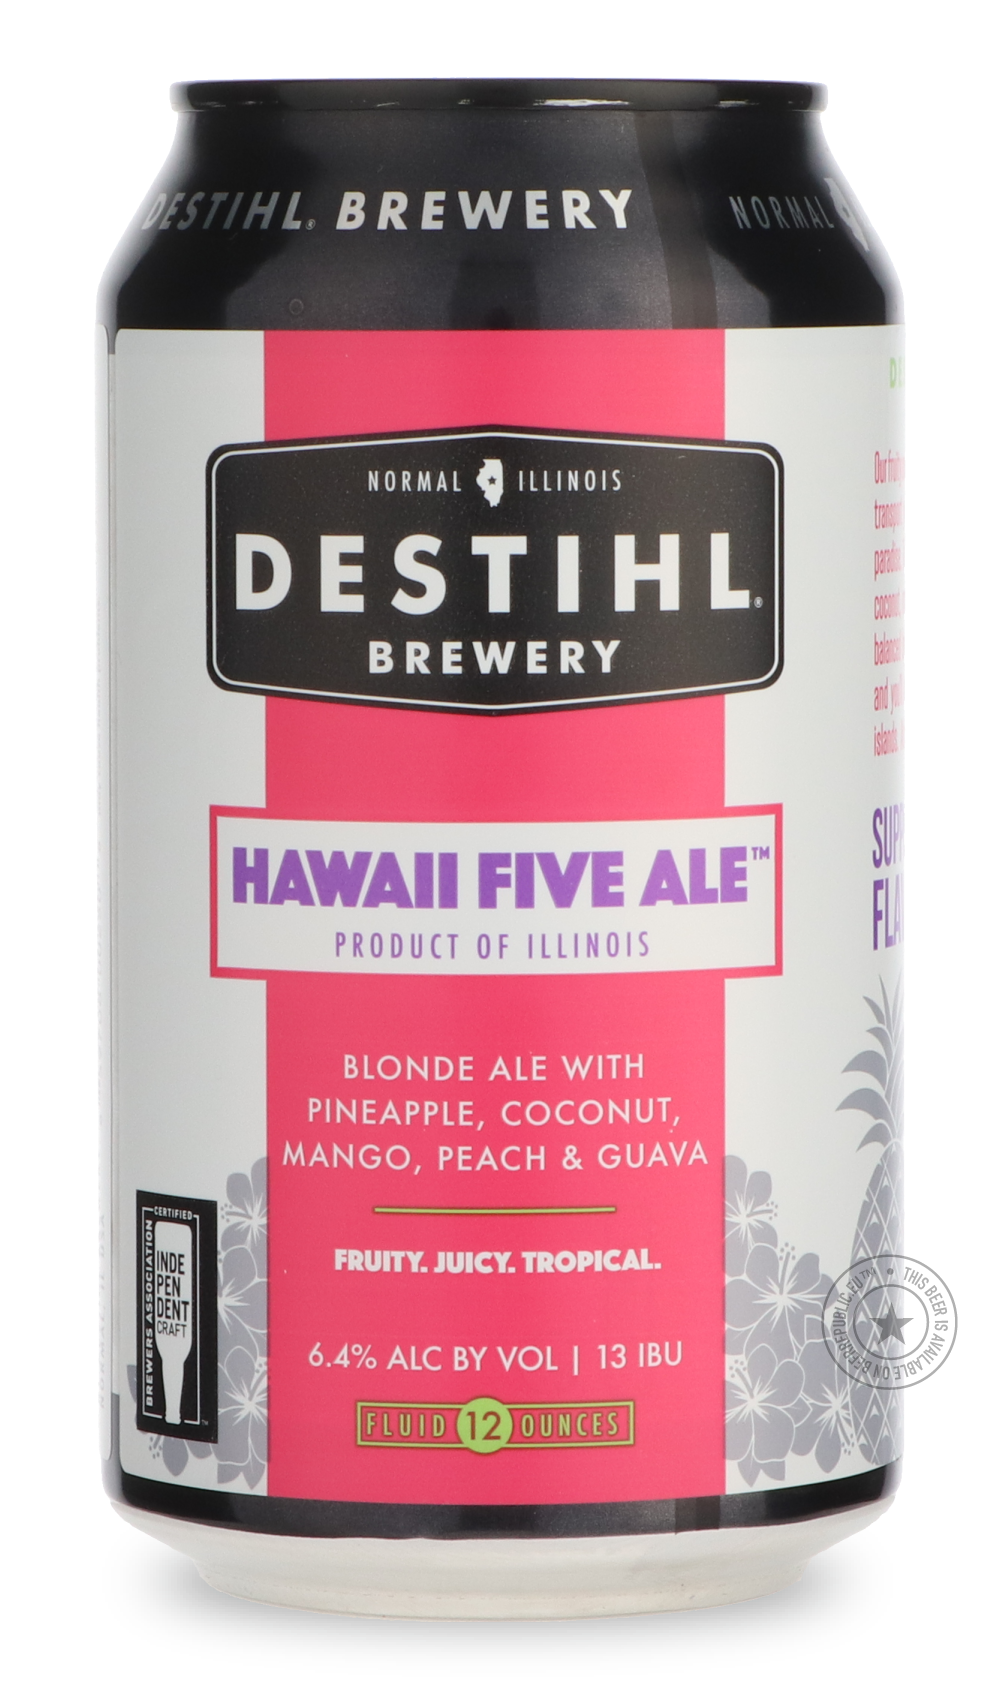 -Destihl- Hawaii Five Ale-Pale- Only @ Beer Republic - The best online beer store for American & Canadian craft beer - Buy beer online from the USA and Canada - Bier online kopen - Amerikaans bier kopen - Craft beer store - Craft beer kopen - Amerikanisch bier kaufen - Bier online kaufen - Acheter biere online - IPA - Stout - Porter - New England IPA - Hazy IPA - Imperial Stout - Barrel Aged - Barrel Aged Imperial Stout - Brown - Dark beer - Blond - Blonde - Pilsner - Lager - Wheat - Weizen - Amber - Barley